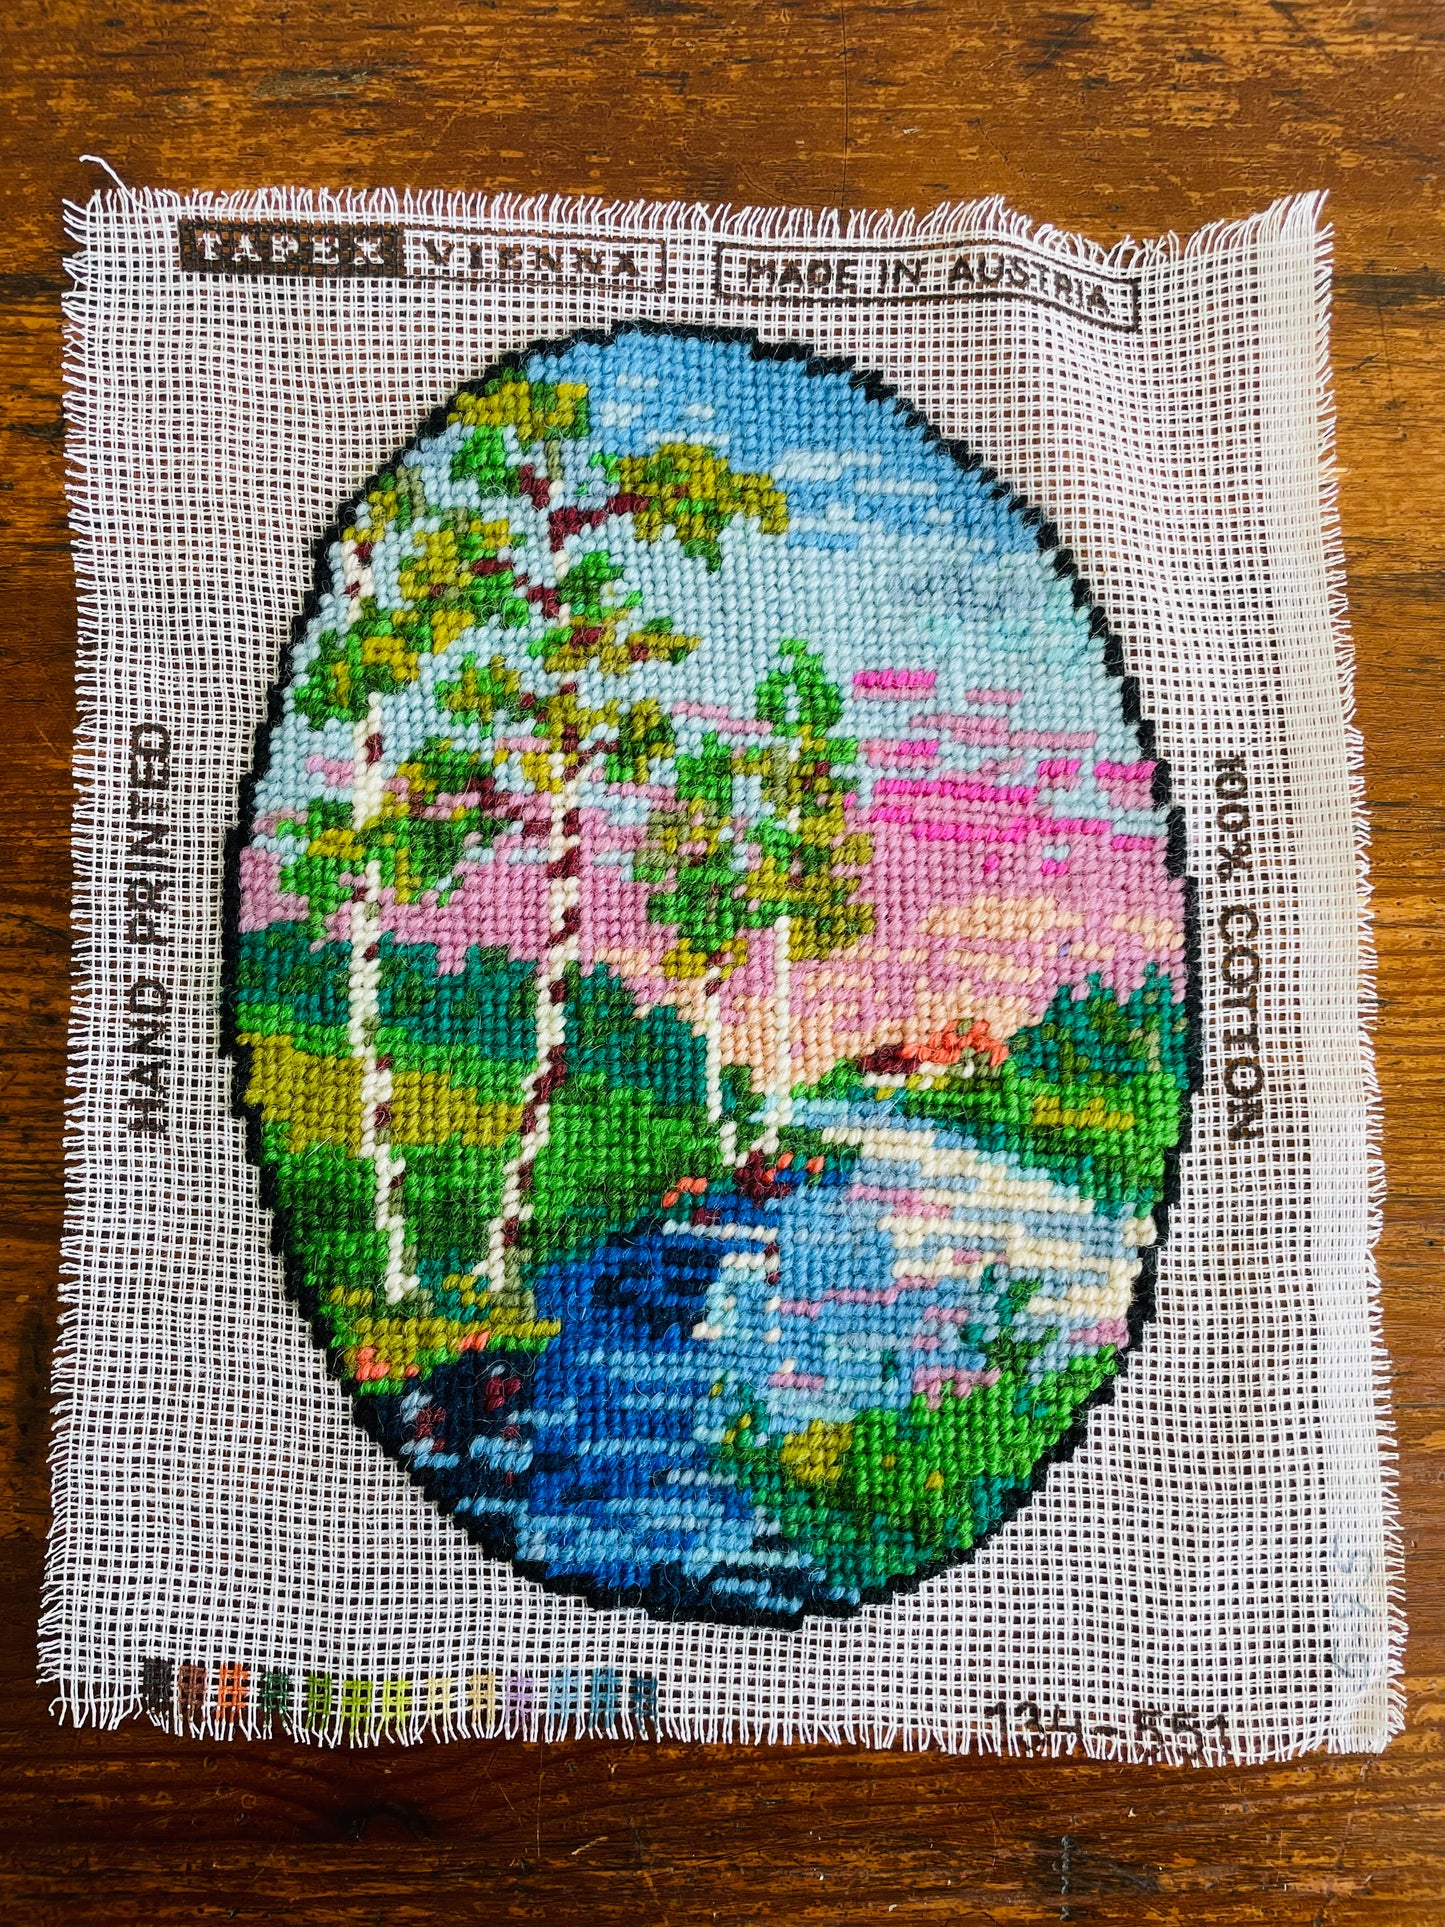 Ready to Frame Embroidery Panel - River & Trees - Made in Vienna, Austria